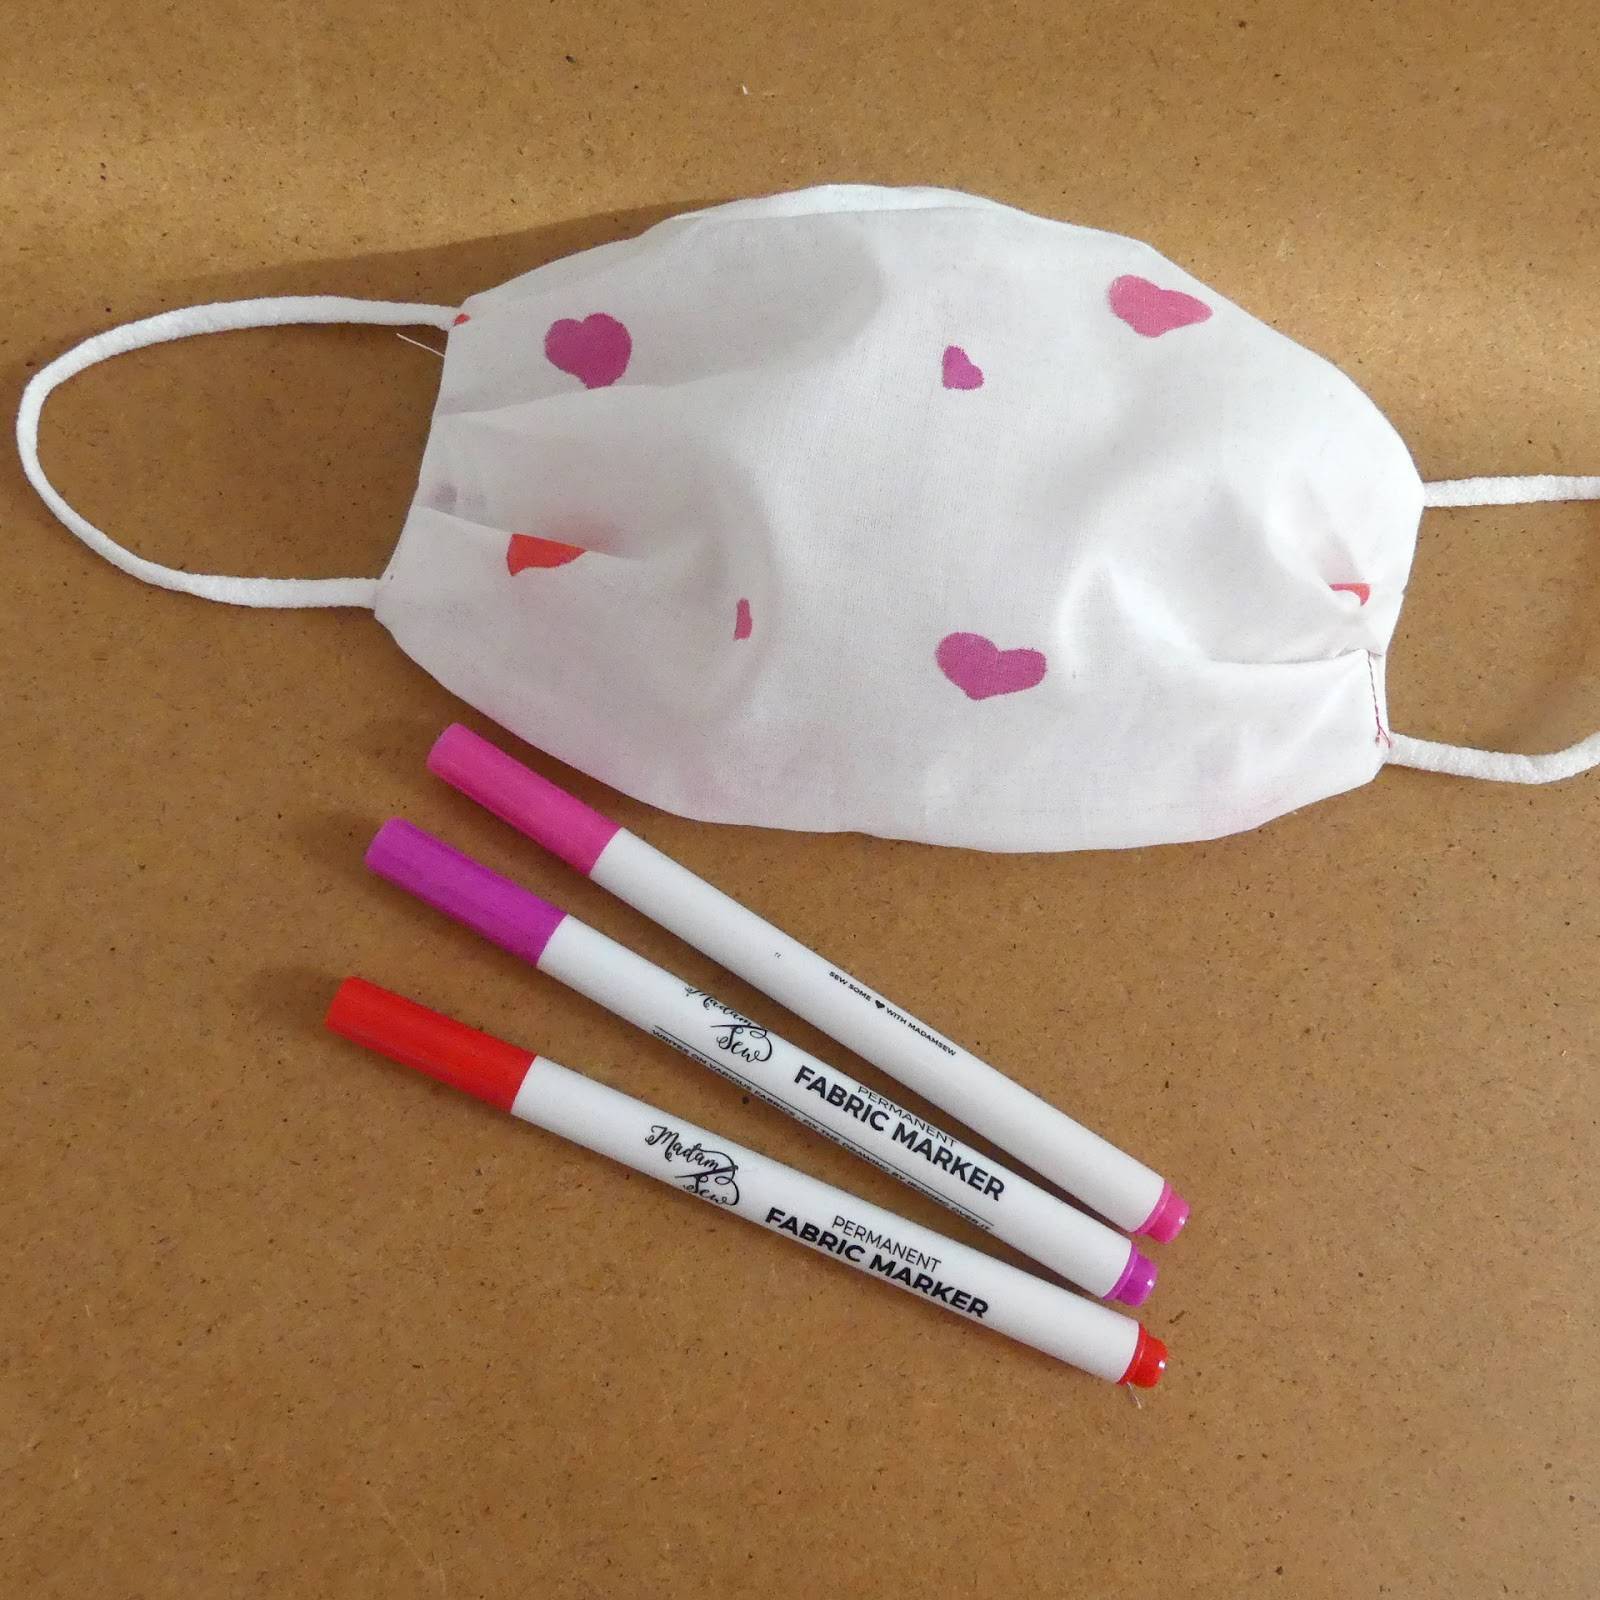 Design Your Own Fabric With Permanent Fabric Markers – MadamSew